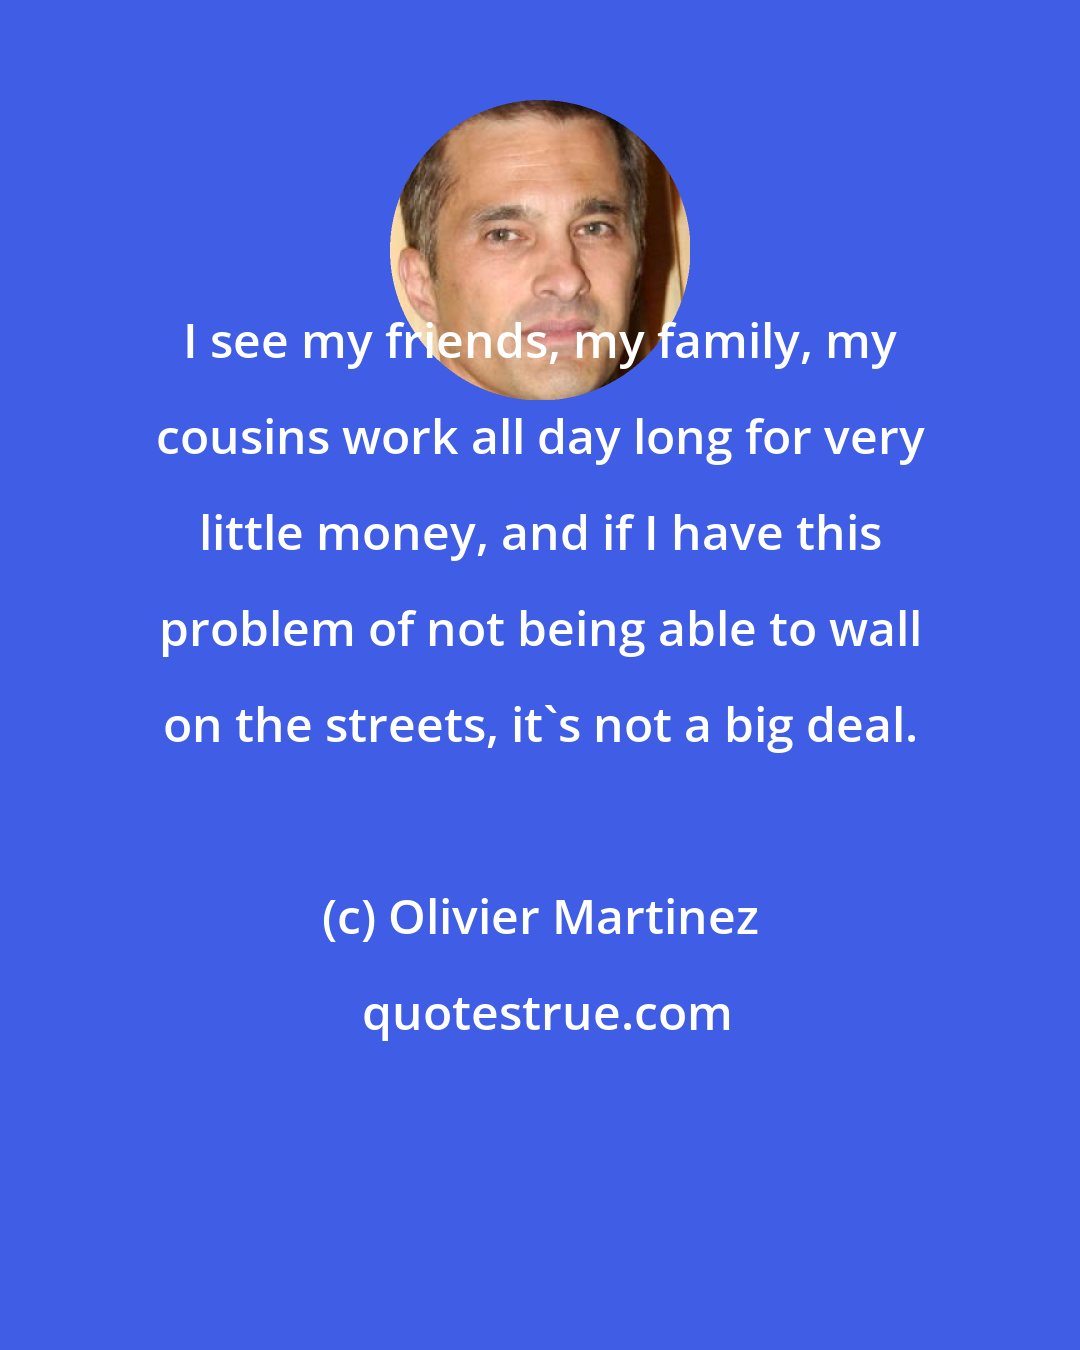 Olivier Martinez: I see my friends, my family, my cousins work all day long for very little money, and if I have this problem of not being able to wall on the streets, it's not a big deal.